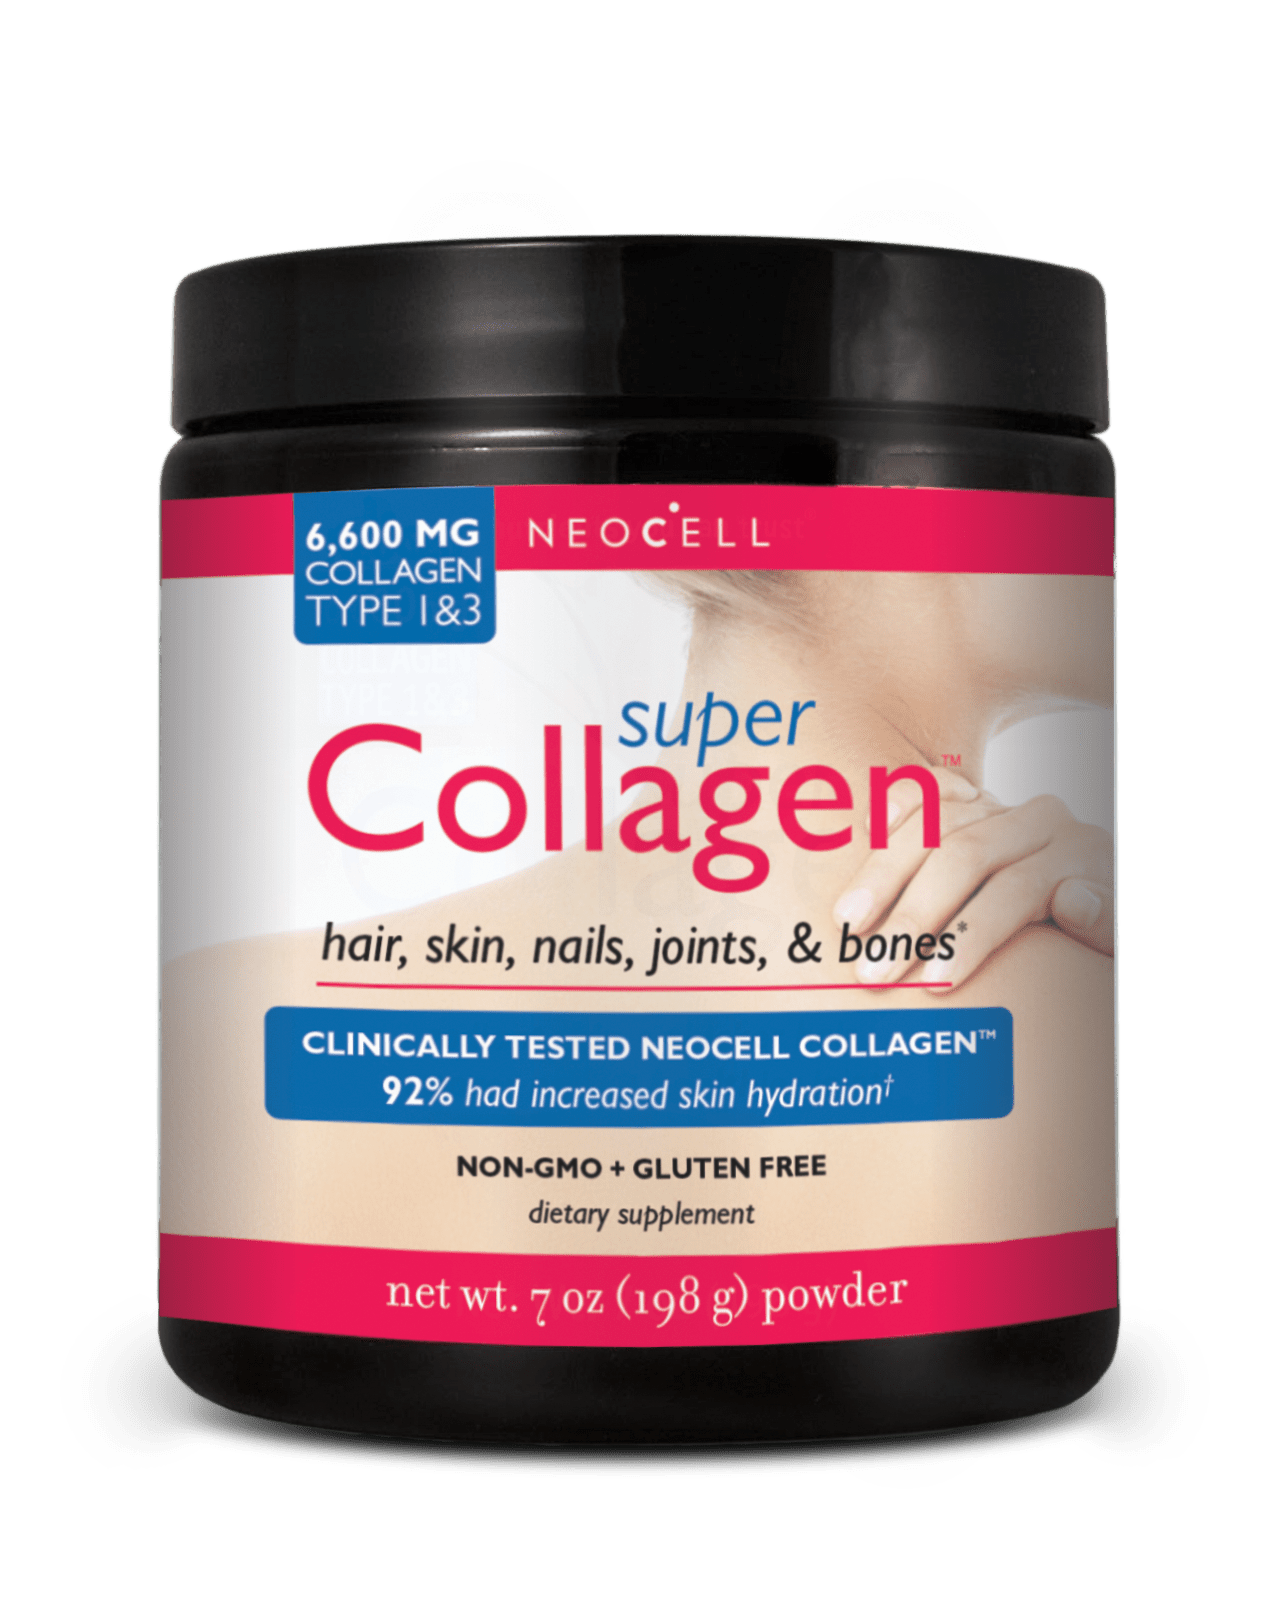 supercollagen-powder-product-image.png